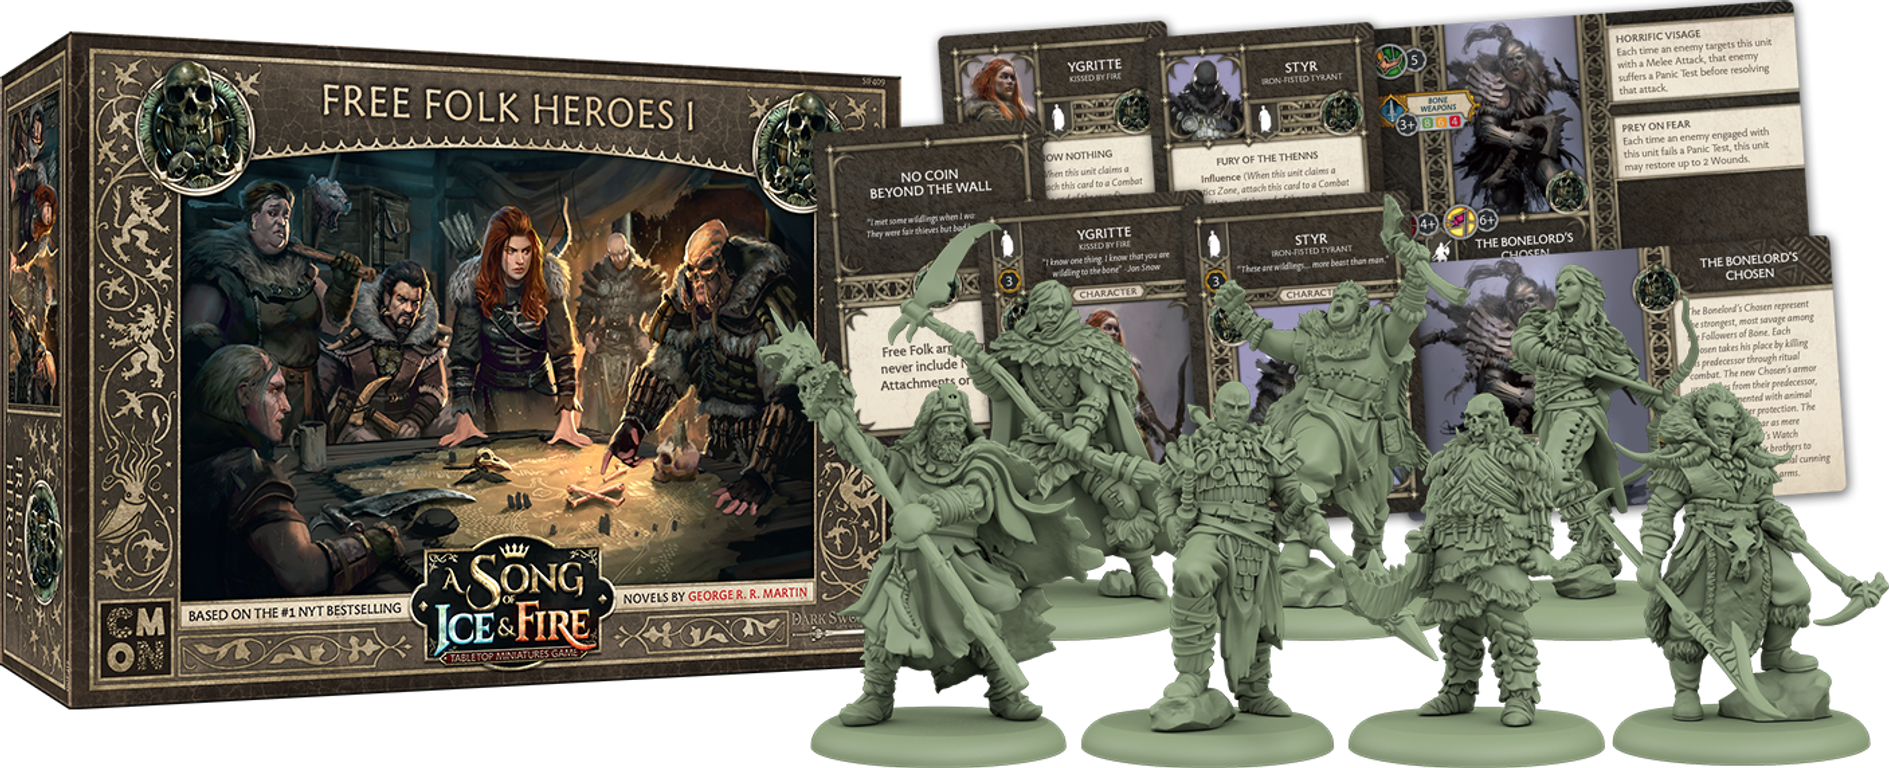 A Song of Ice & Fire: Tabletop Miniatures Game – Free Folk Heroes I composants